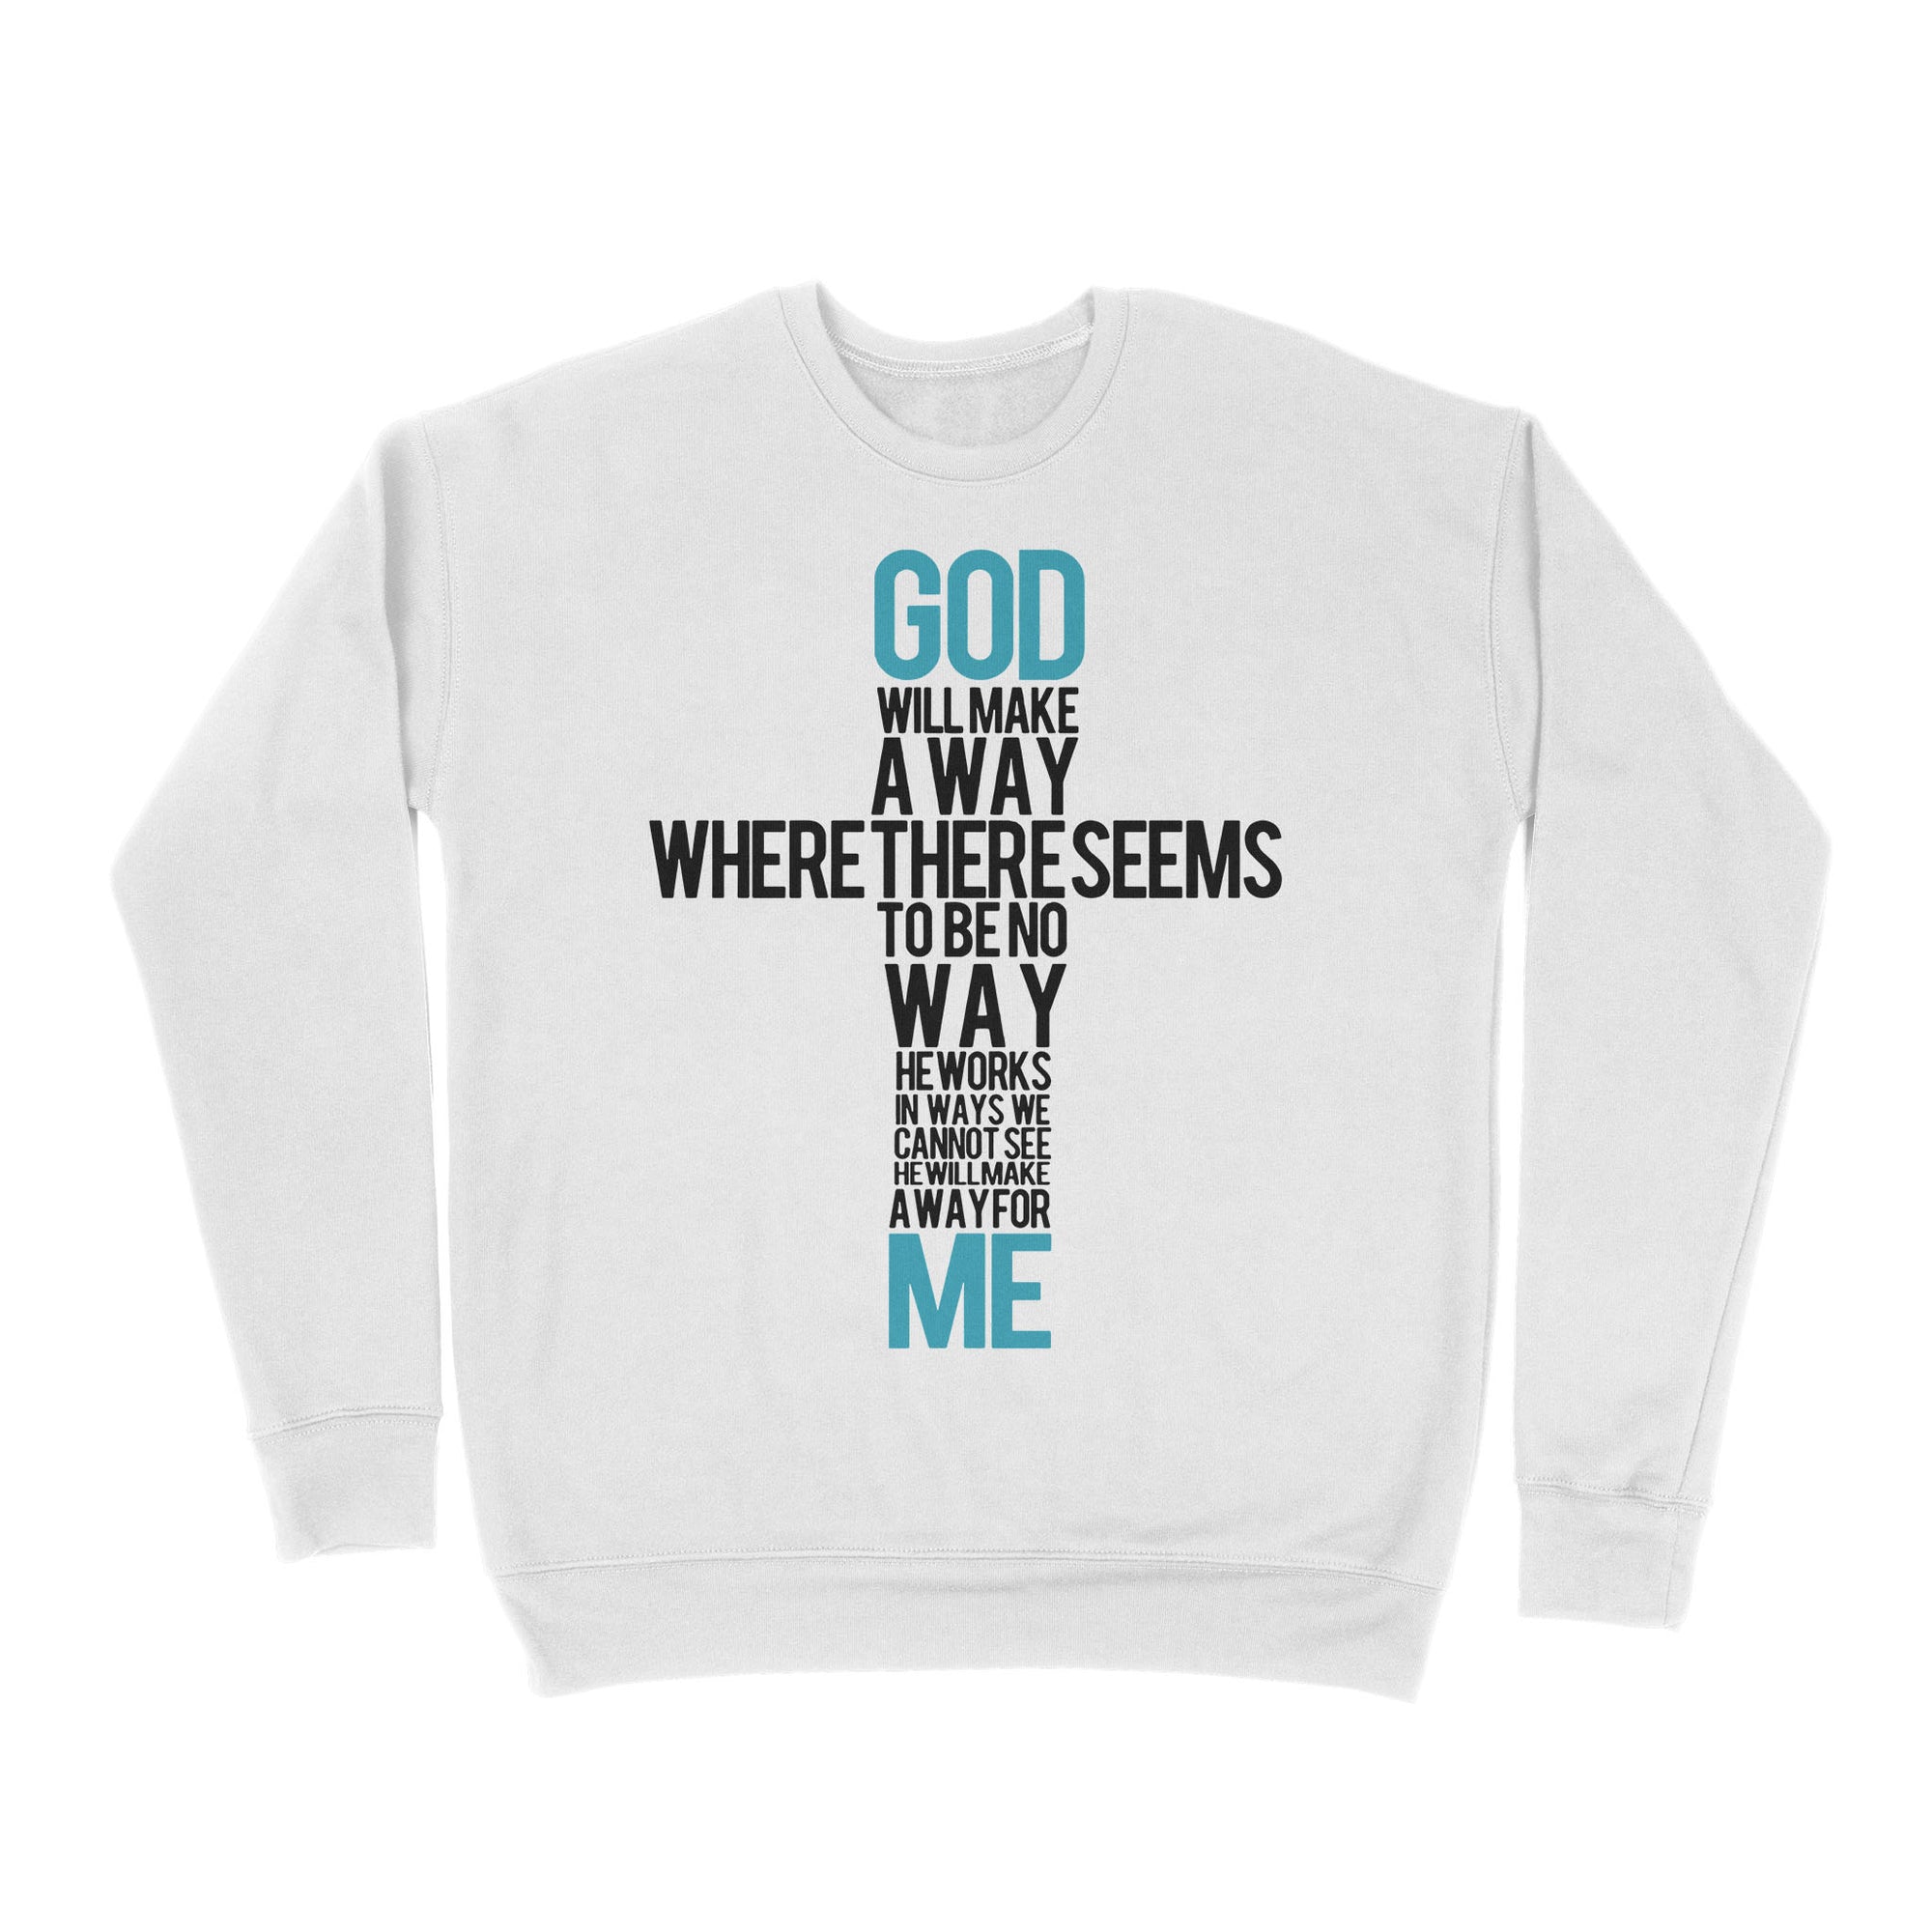 Premium Crew Neck Sweatshirt - God Will Make A Way When It Seems There Is No Way